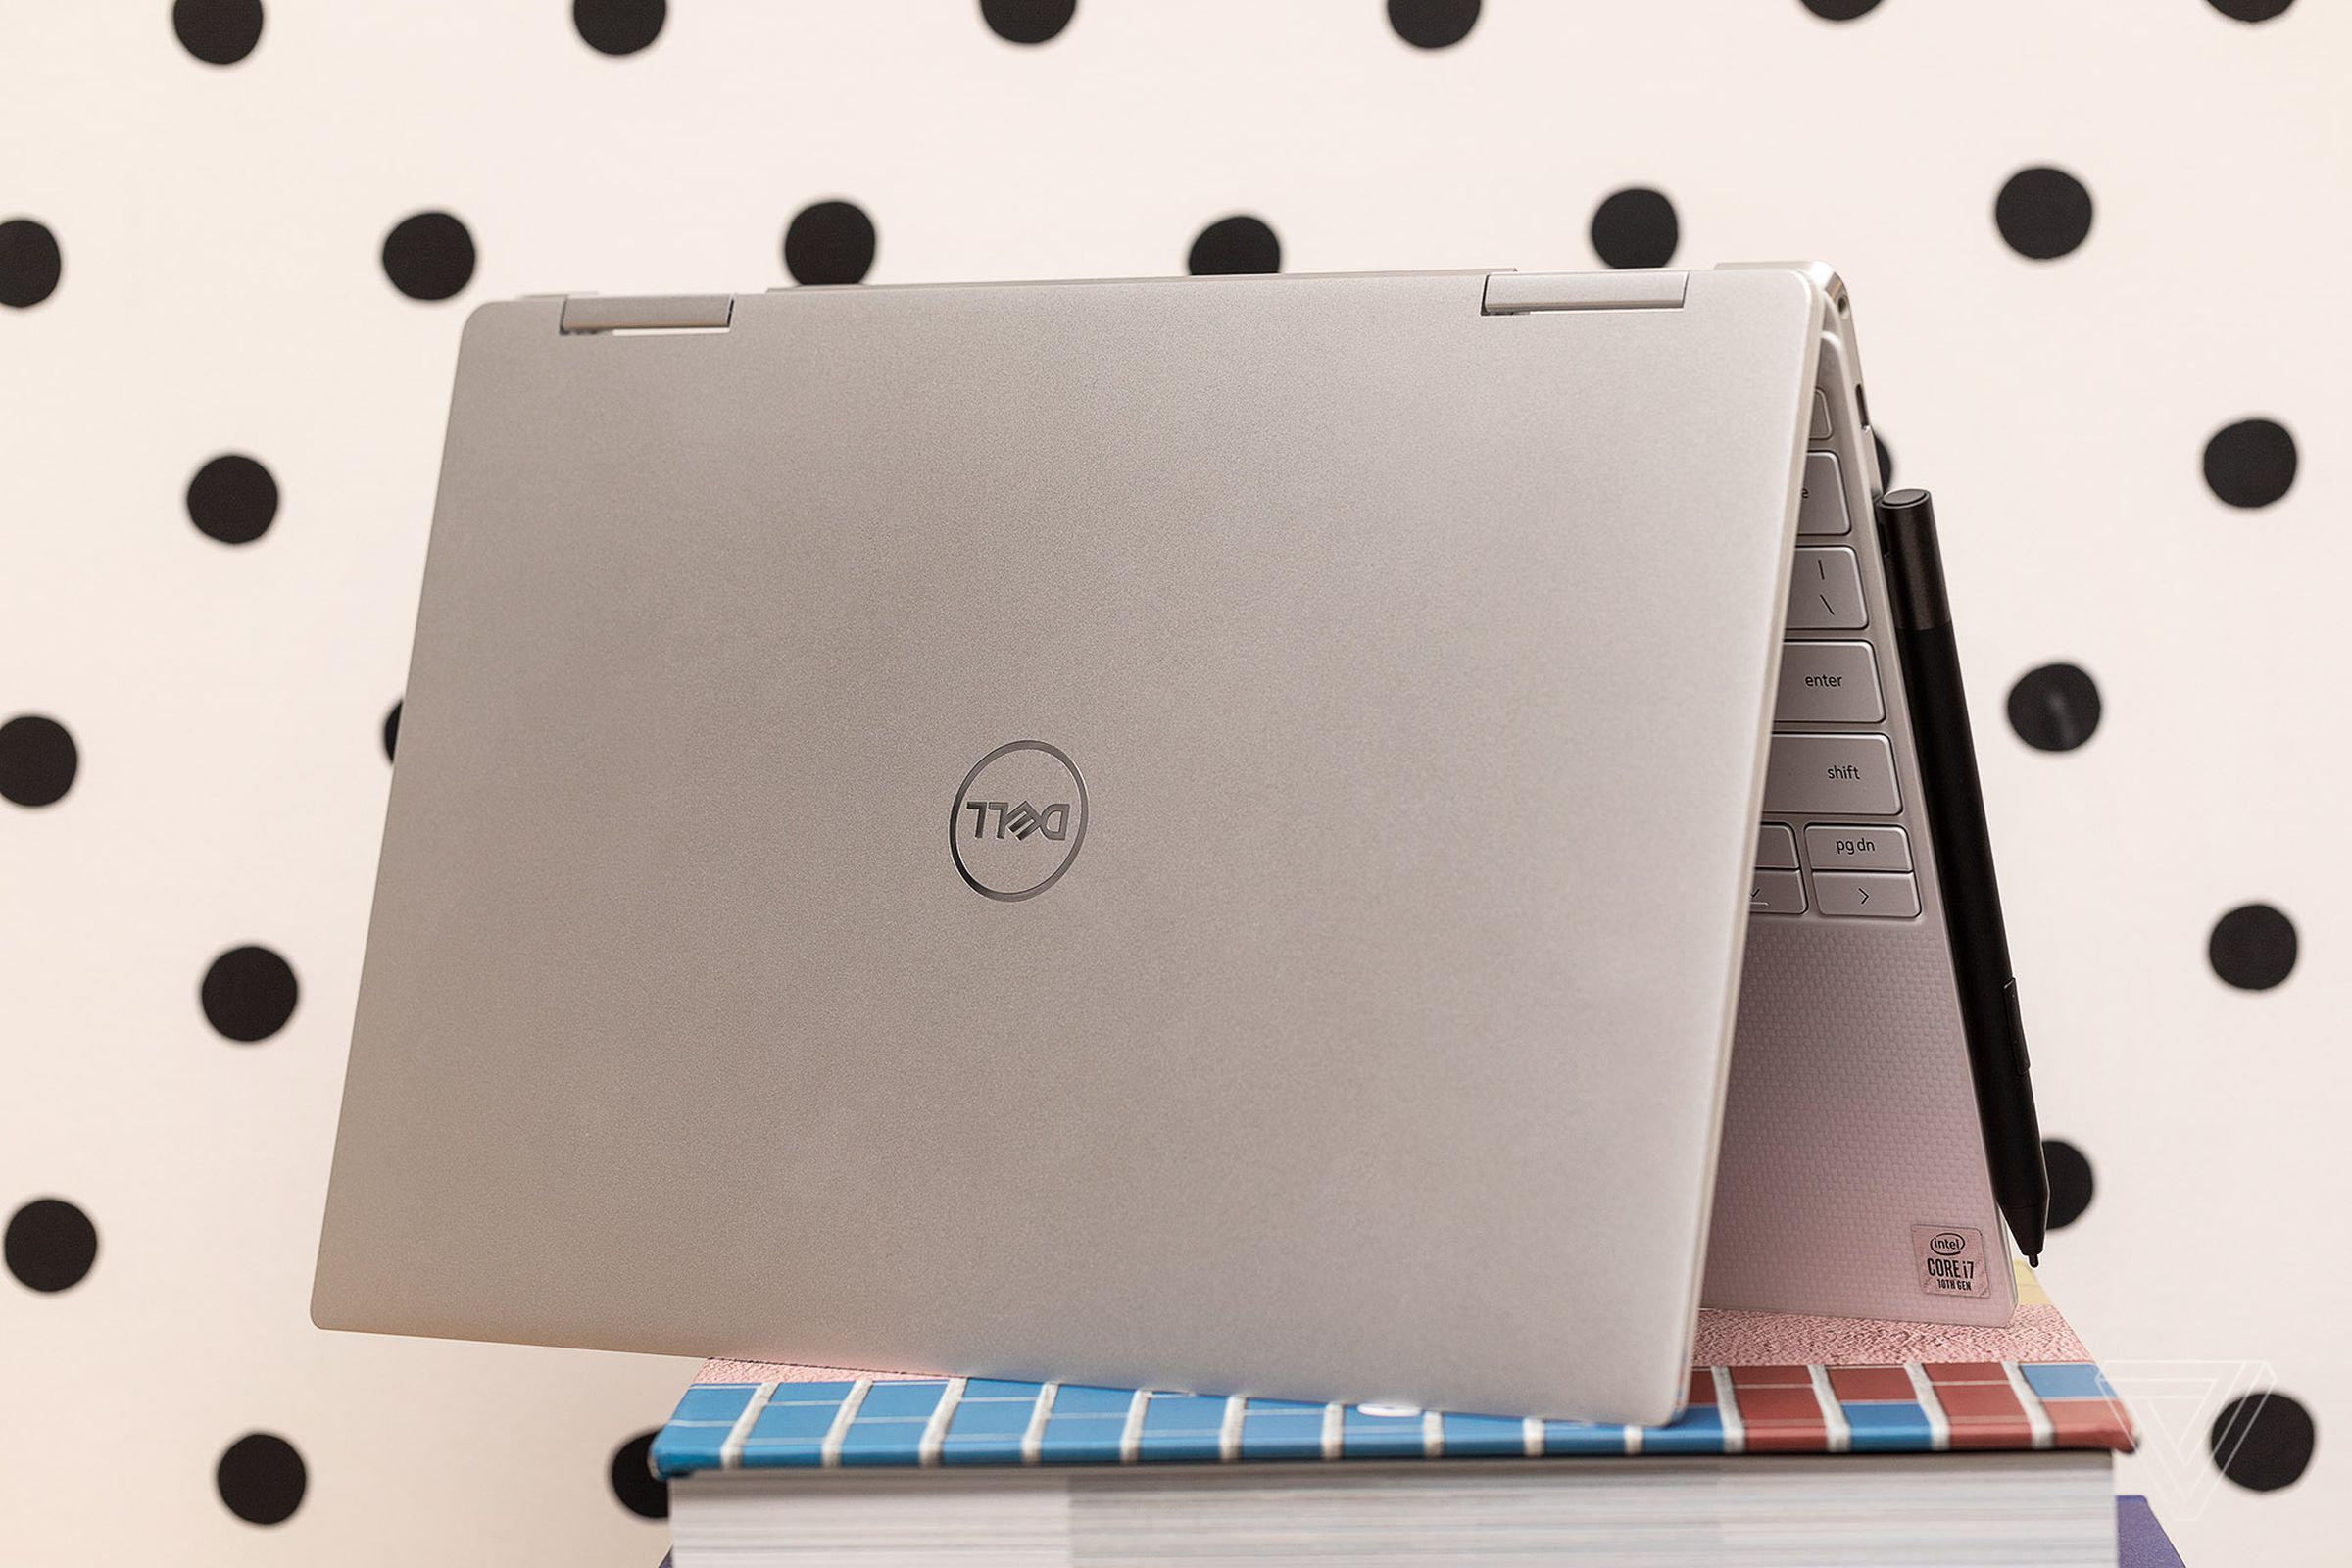 An optional pen can stick to the side of the XPS 13 2-in-1 via magnets